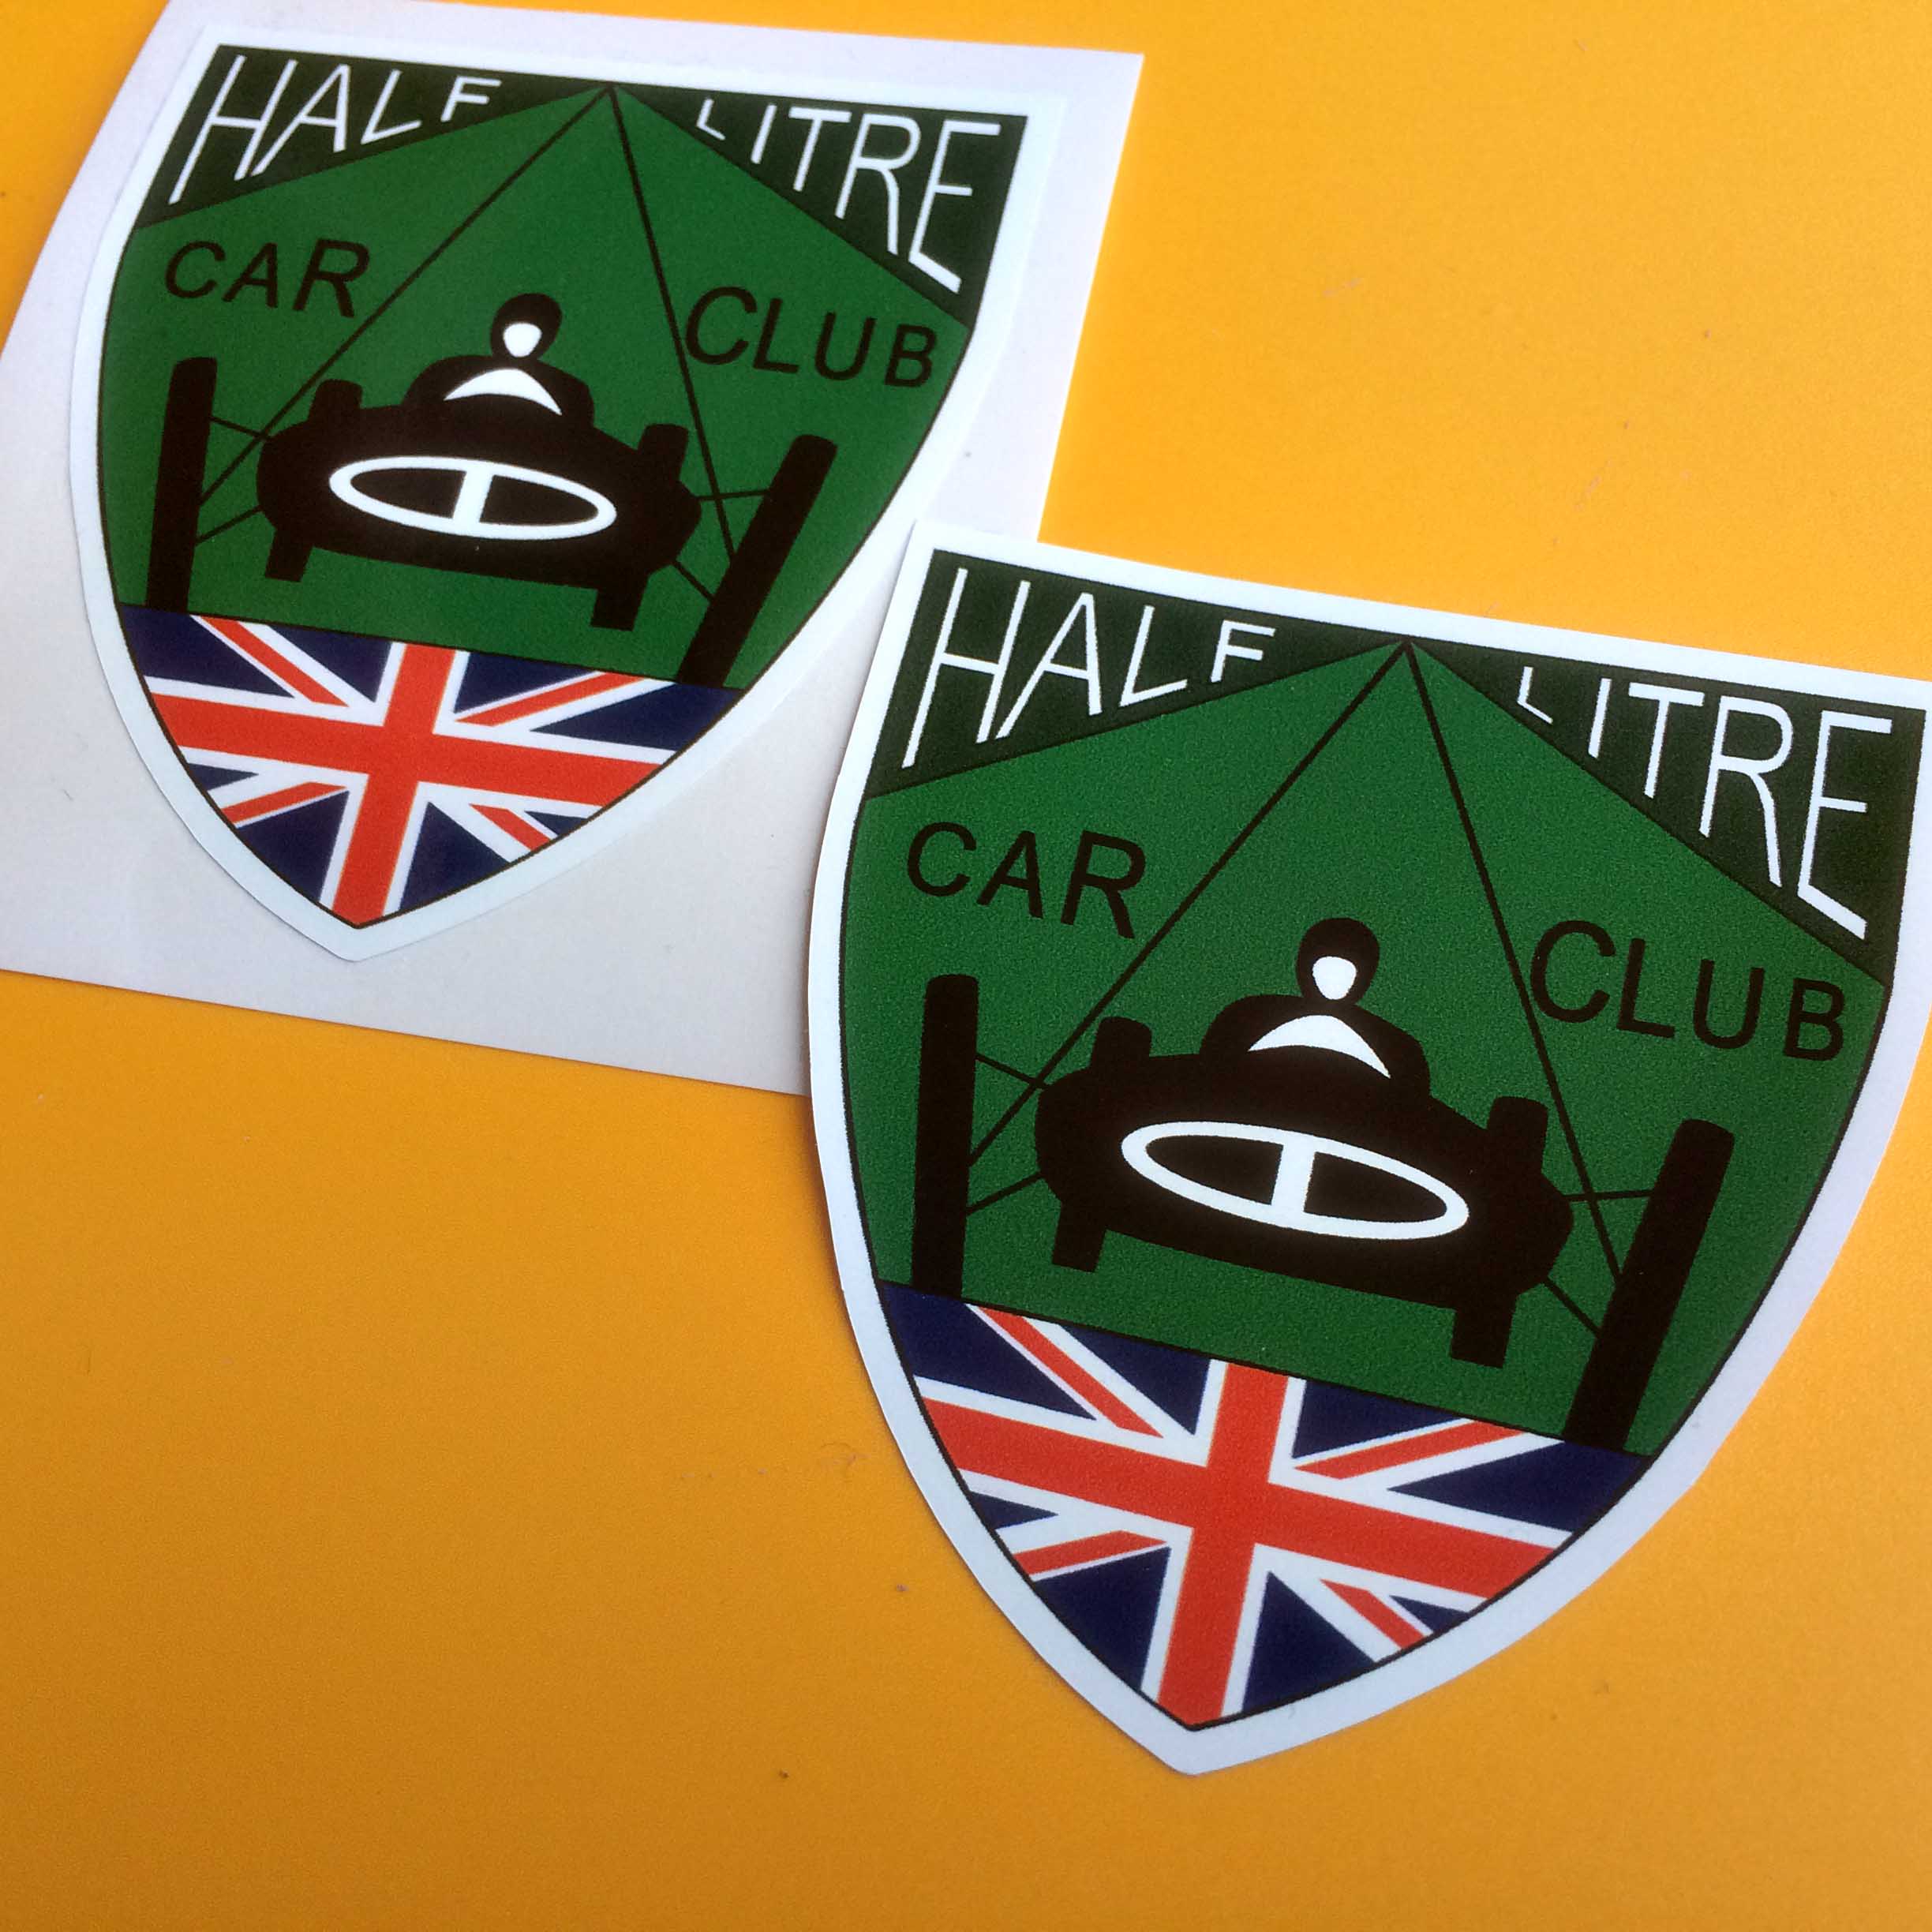 HALF LITRE CAR CLUB STICKERS. Half Litre Car Club in black and white lettering on a shield shaped sticker. In the centre is a black racing car driven by a man in white on a green racetrack. Below this is a Union Jack.